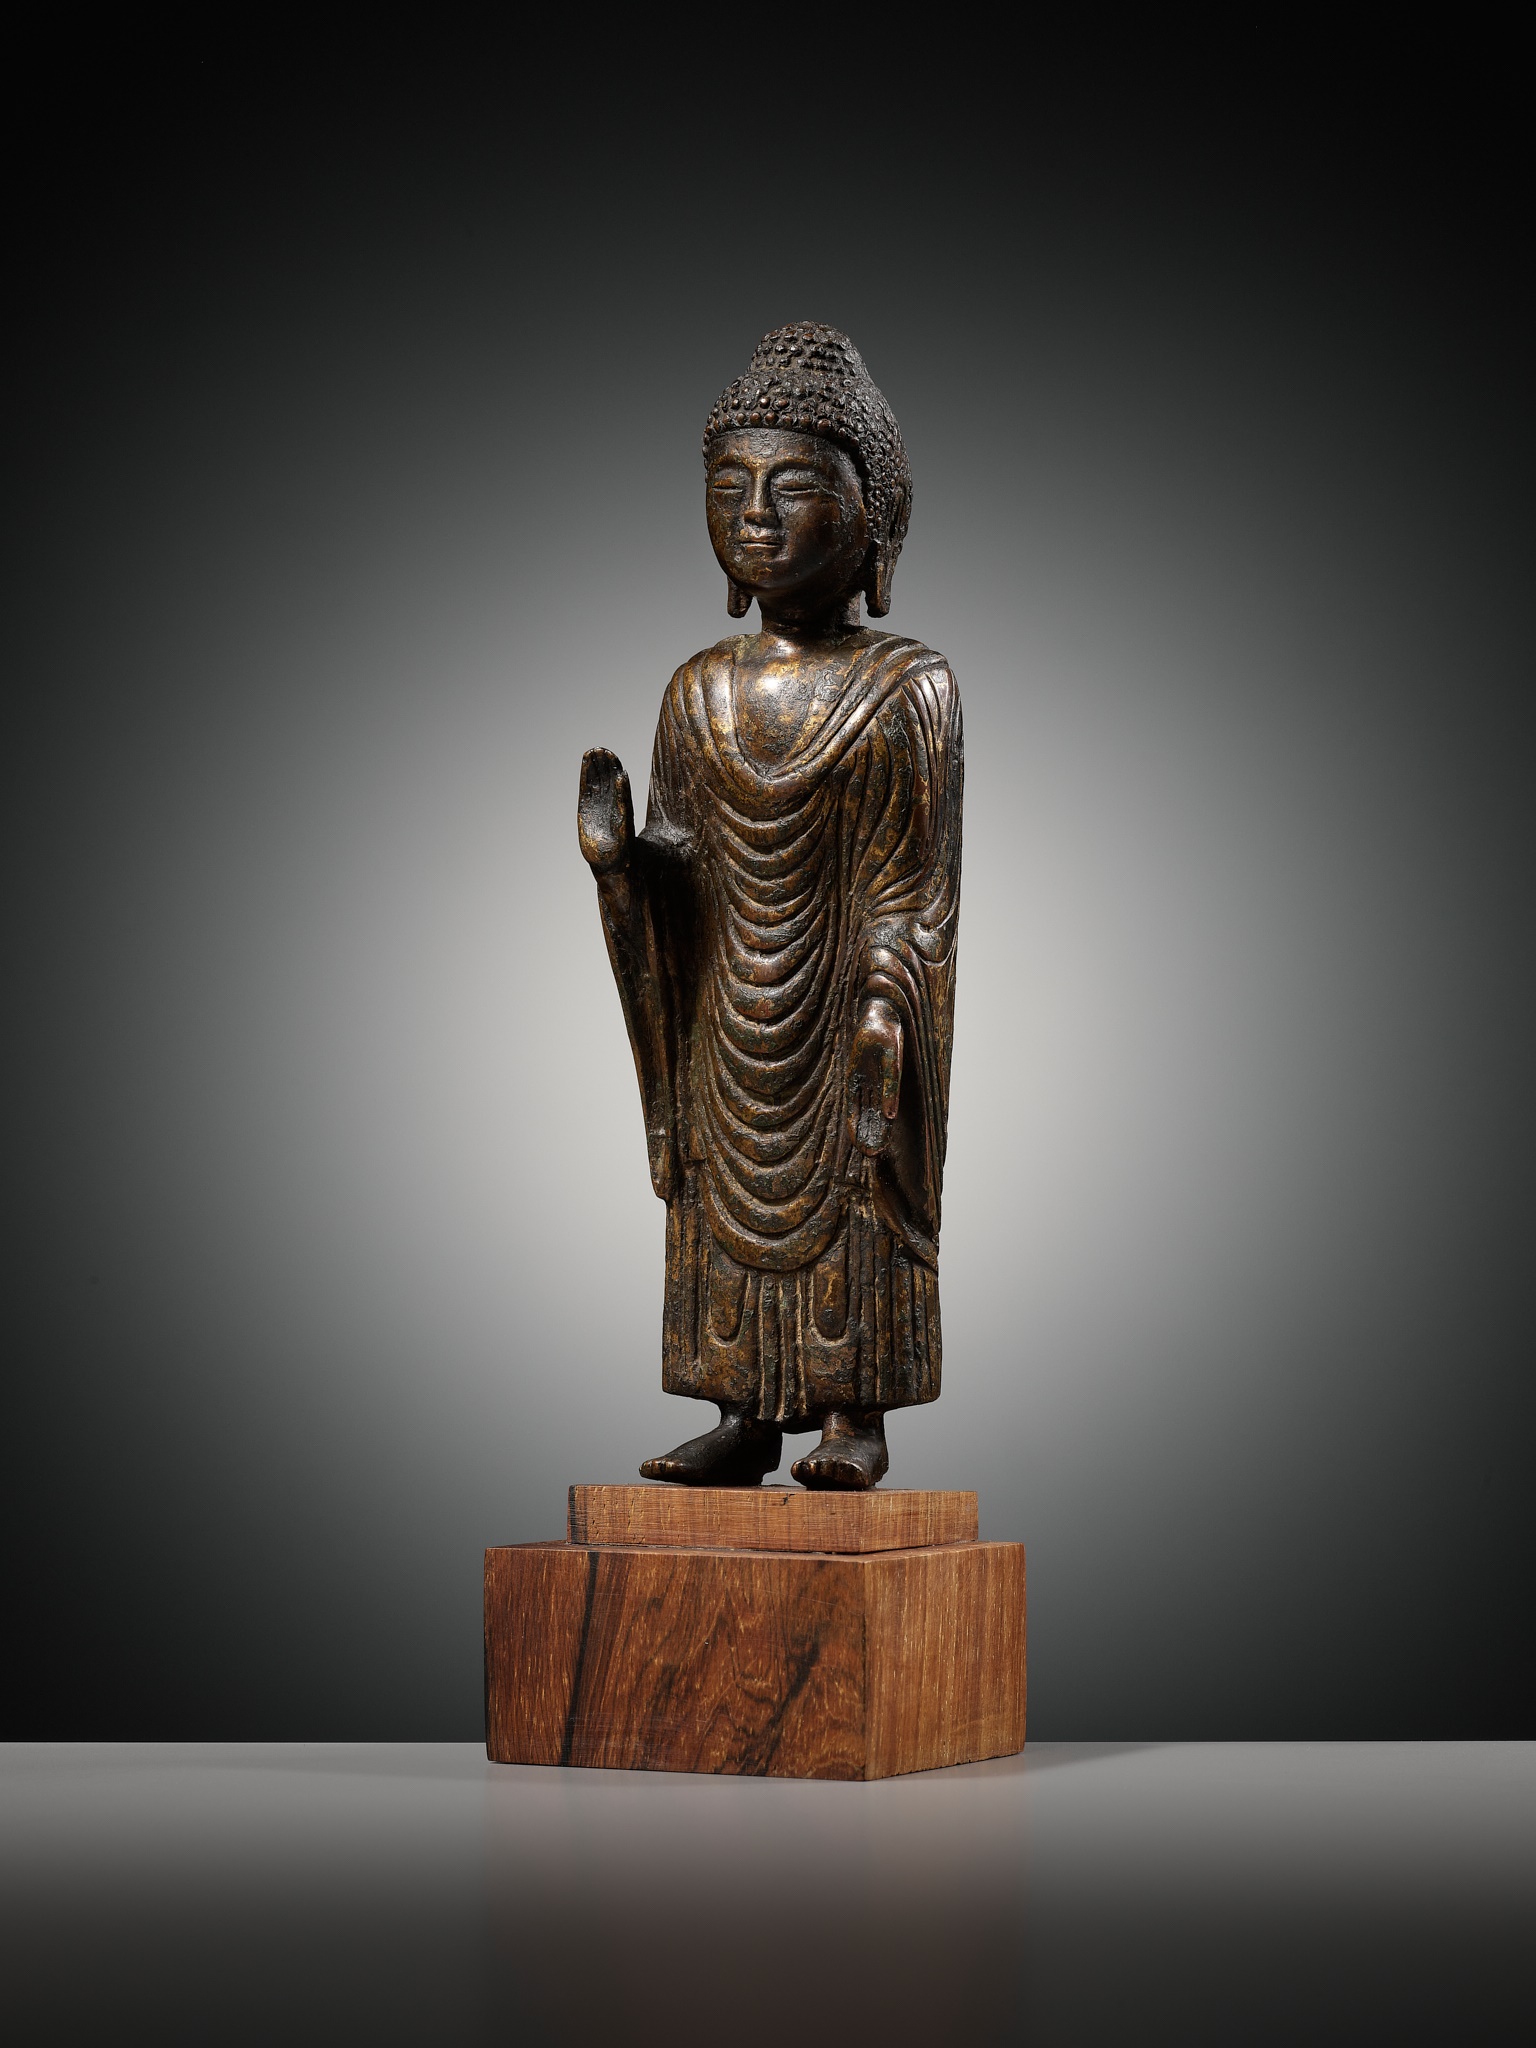 A GILT-BRONZE STANDING FIGURE OF BUDDHA, UNIFIED SILLA DYNASTY, KOREA, 8TH - 9TH CENTURY - Image 3 of 12